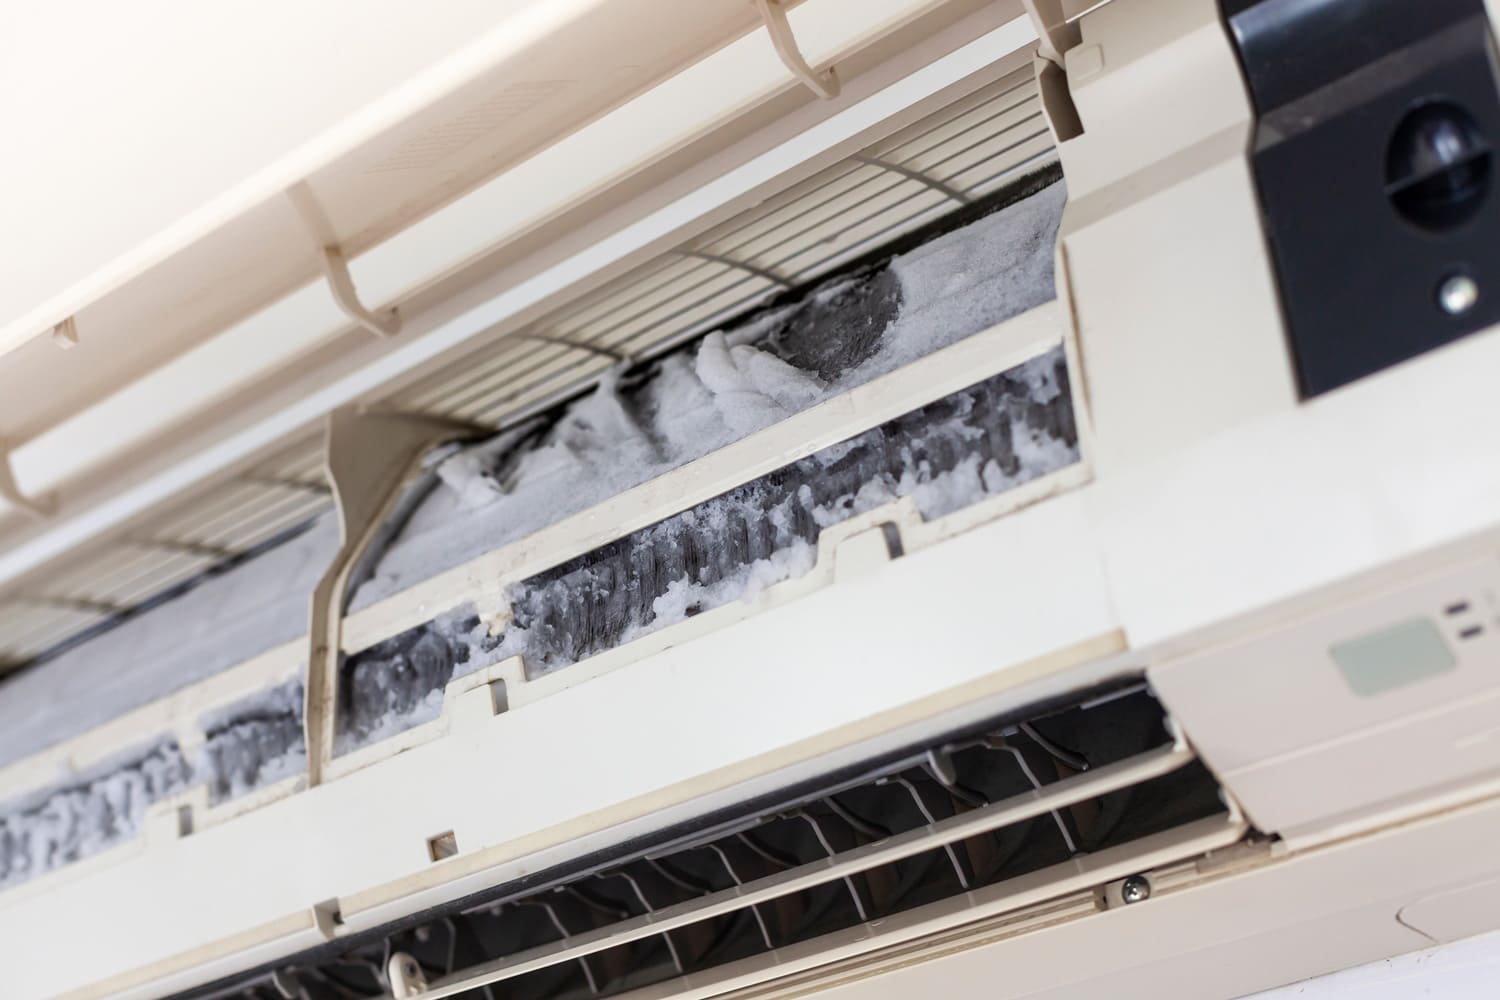 Unclean air conditioners cause respiratory problems.